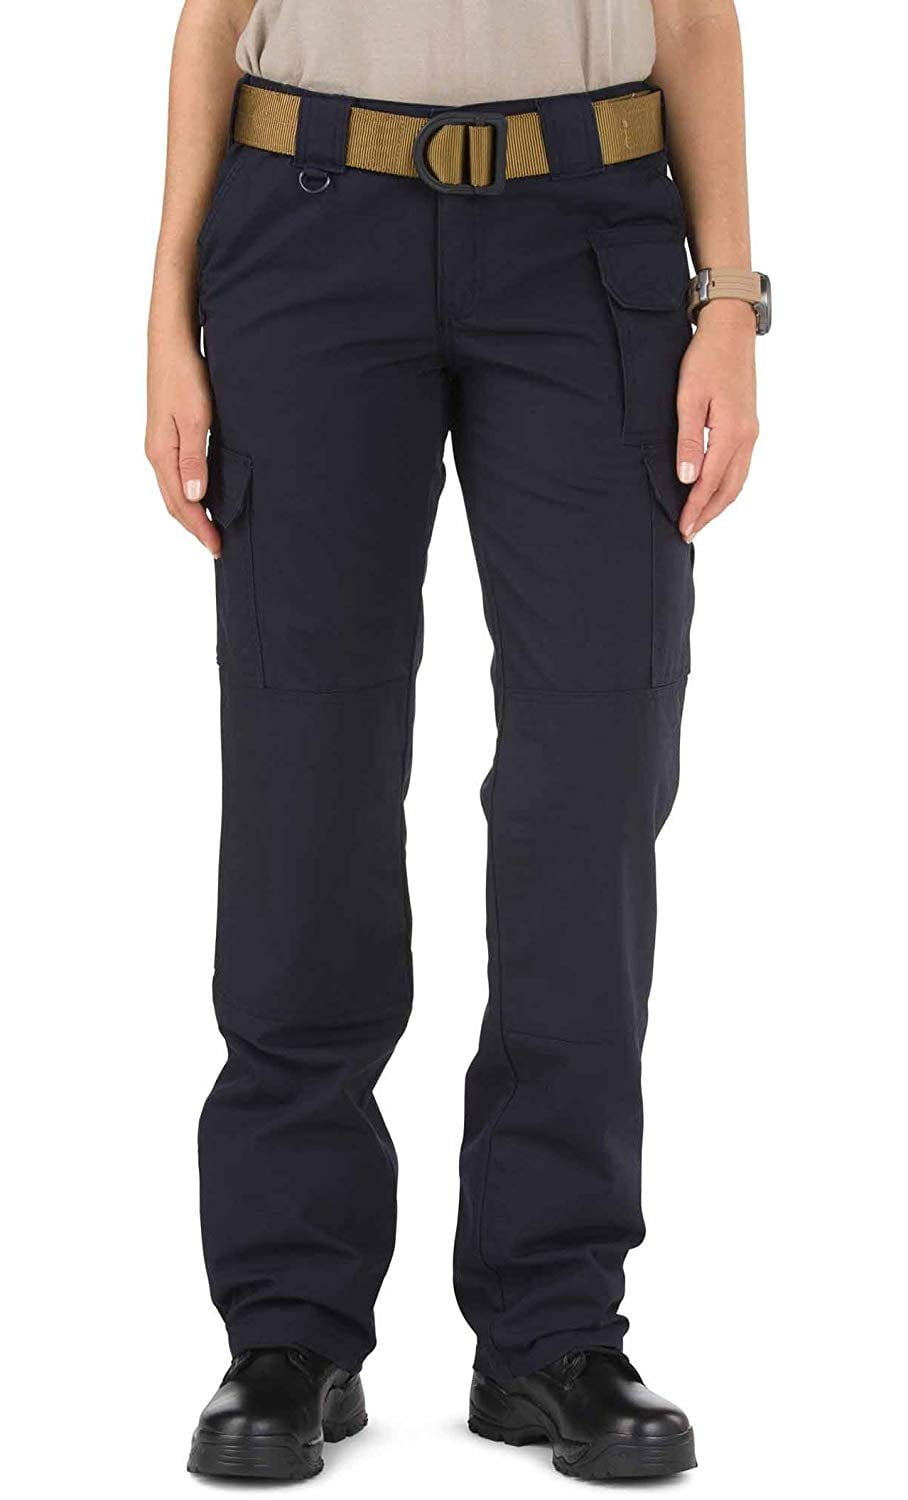 5.11 Tactical Womens Military Work Pants Style 64358 Self-Adjusting Waistband Cotton Canvas 